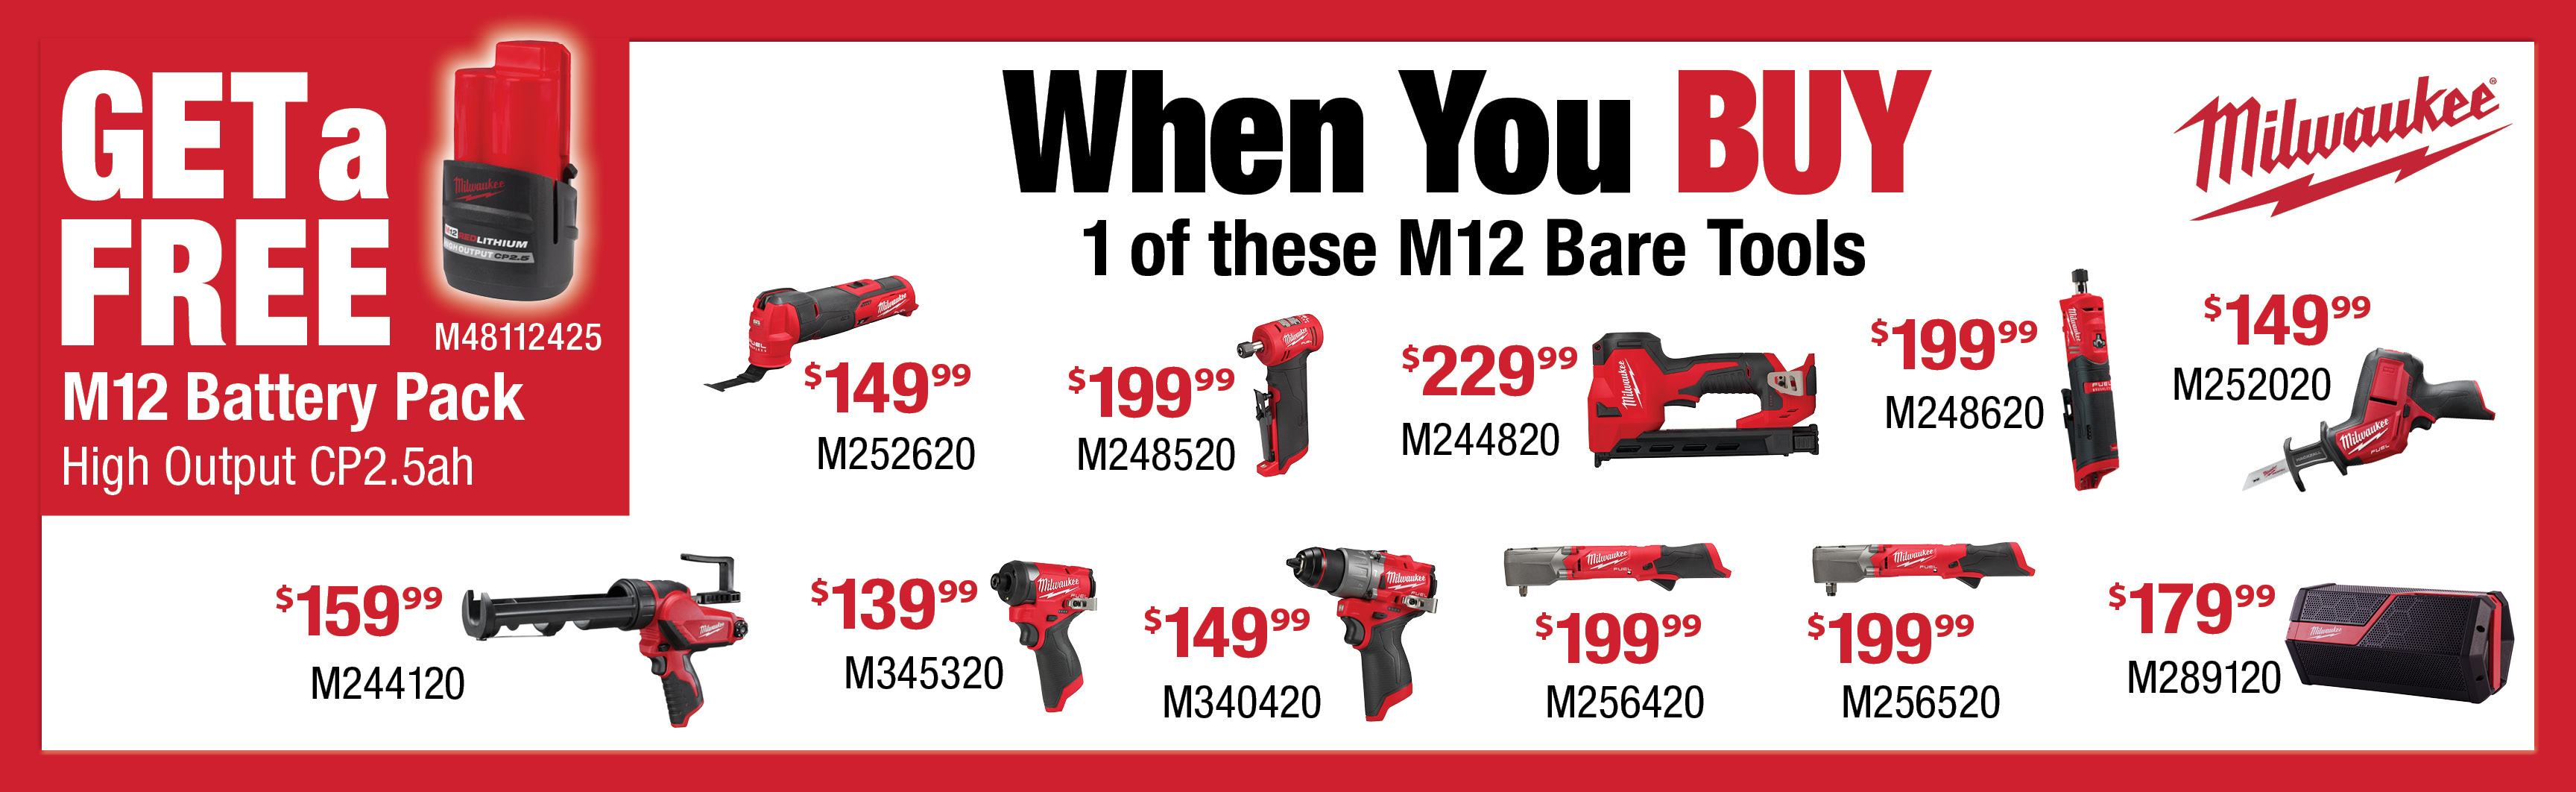 Milwaukee May - July: Buy 1 Qualifying M12 Bare Tool get a FREE M48112425 M12 Battery Pack 